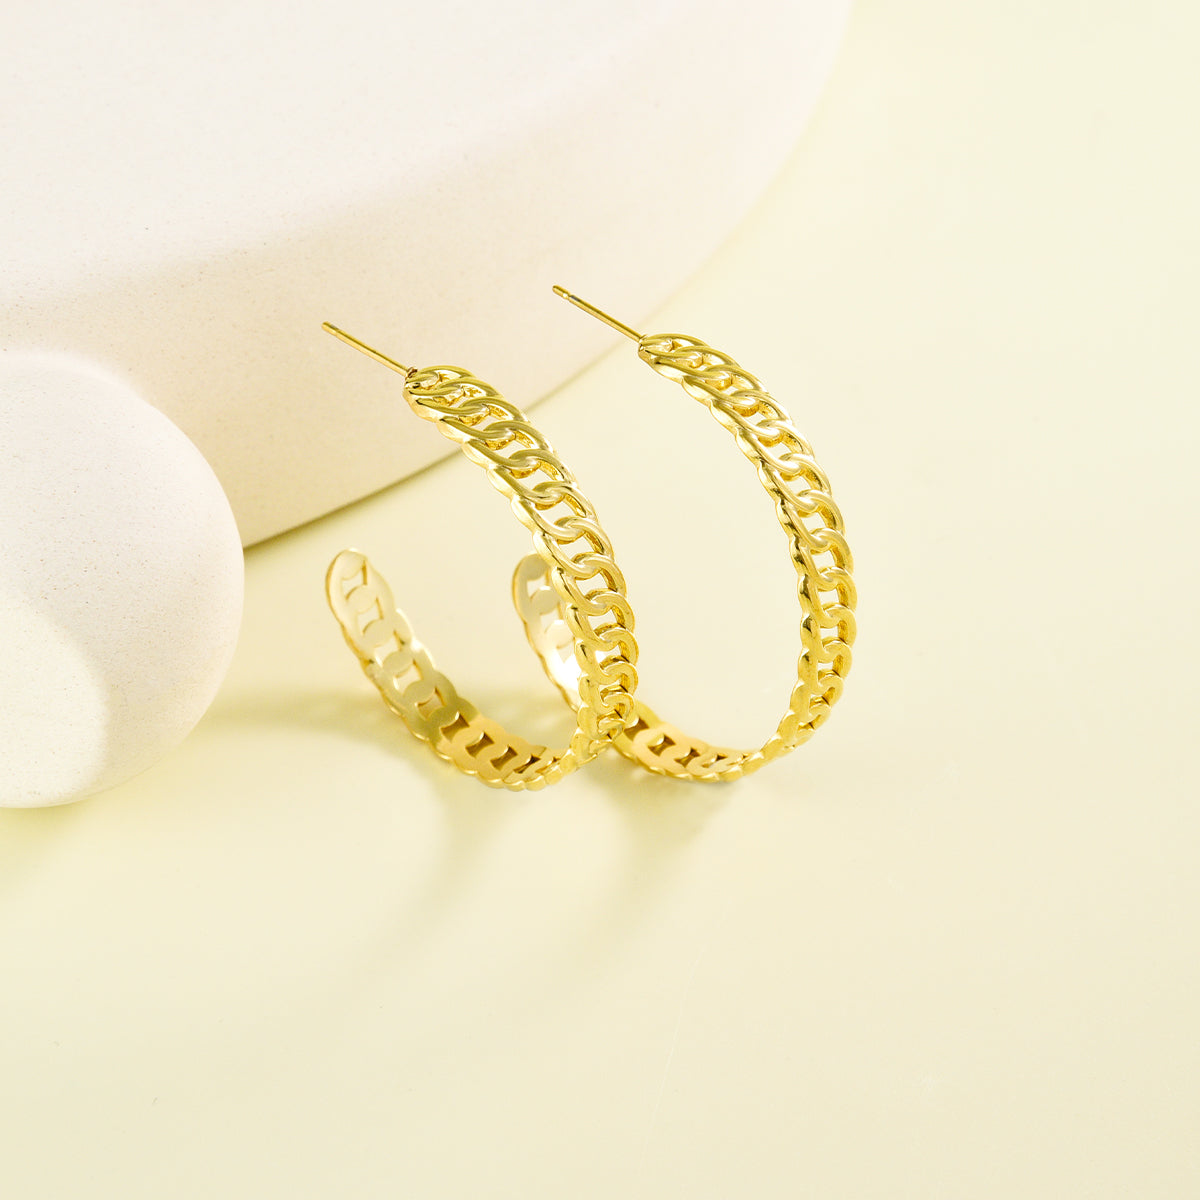 Large sized golden earrings with chain design